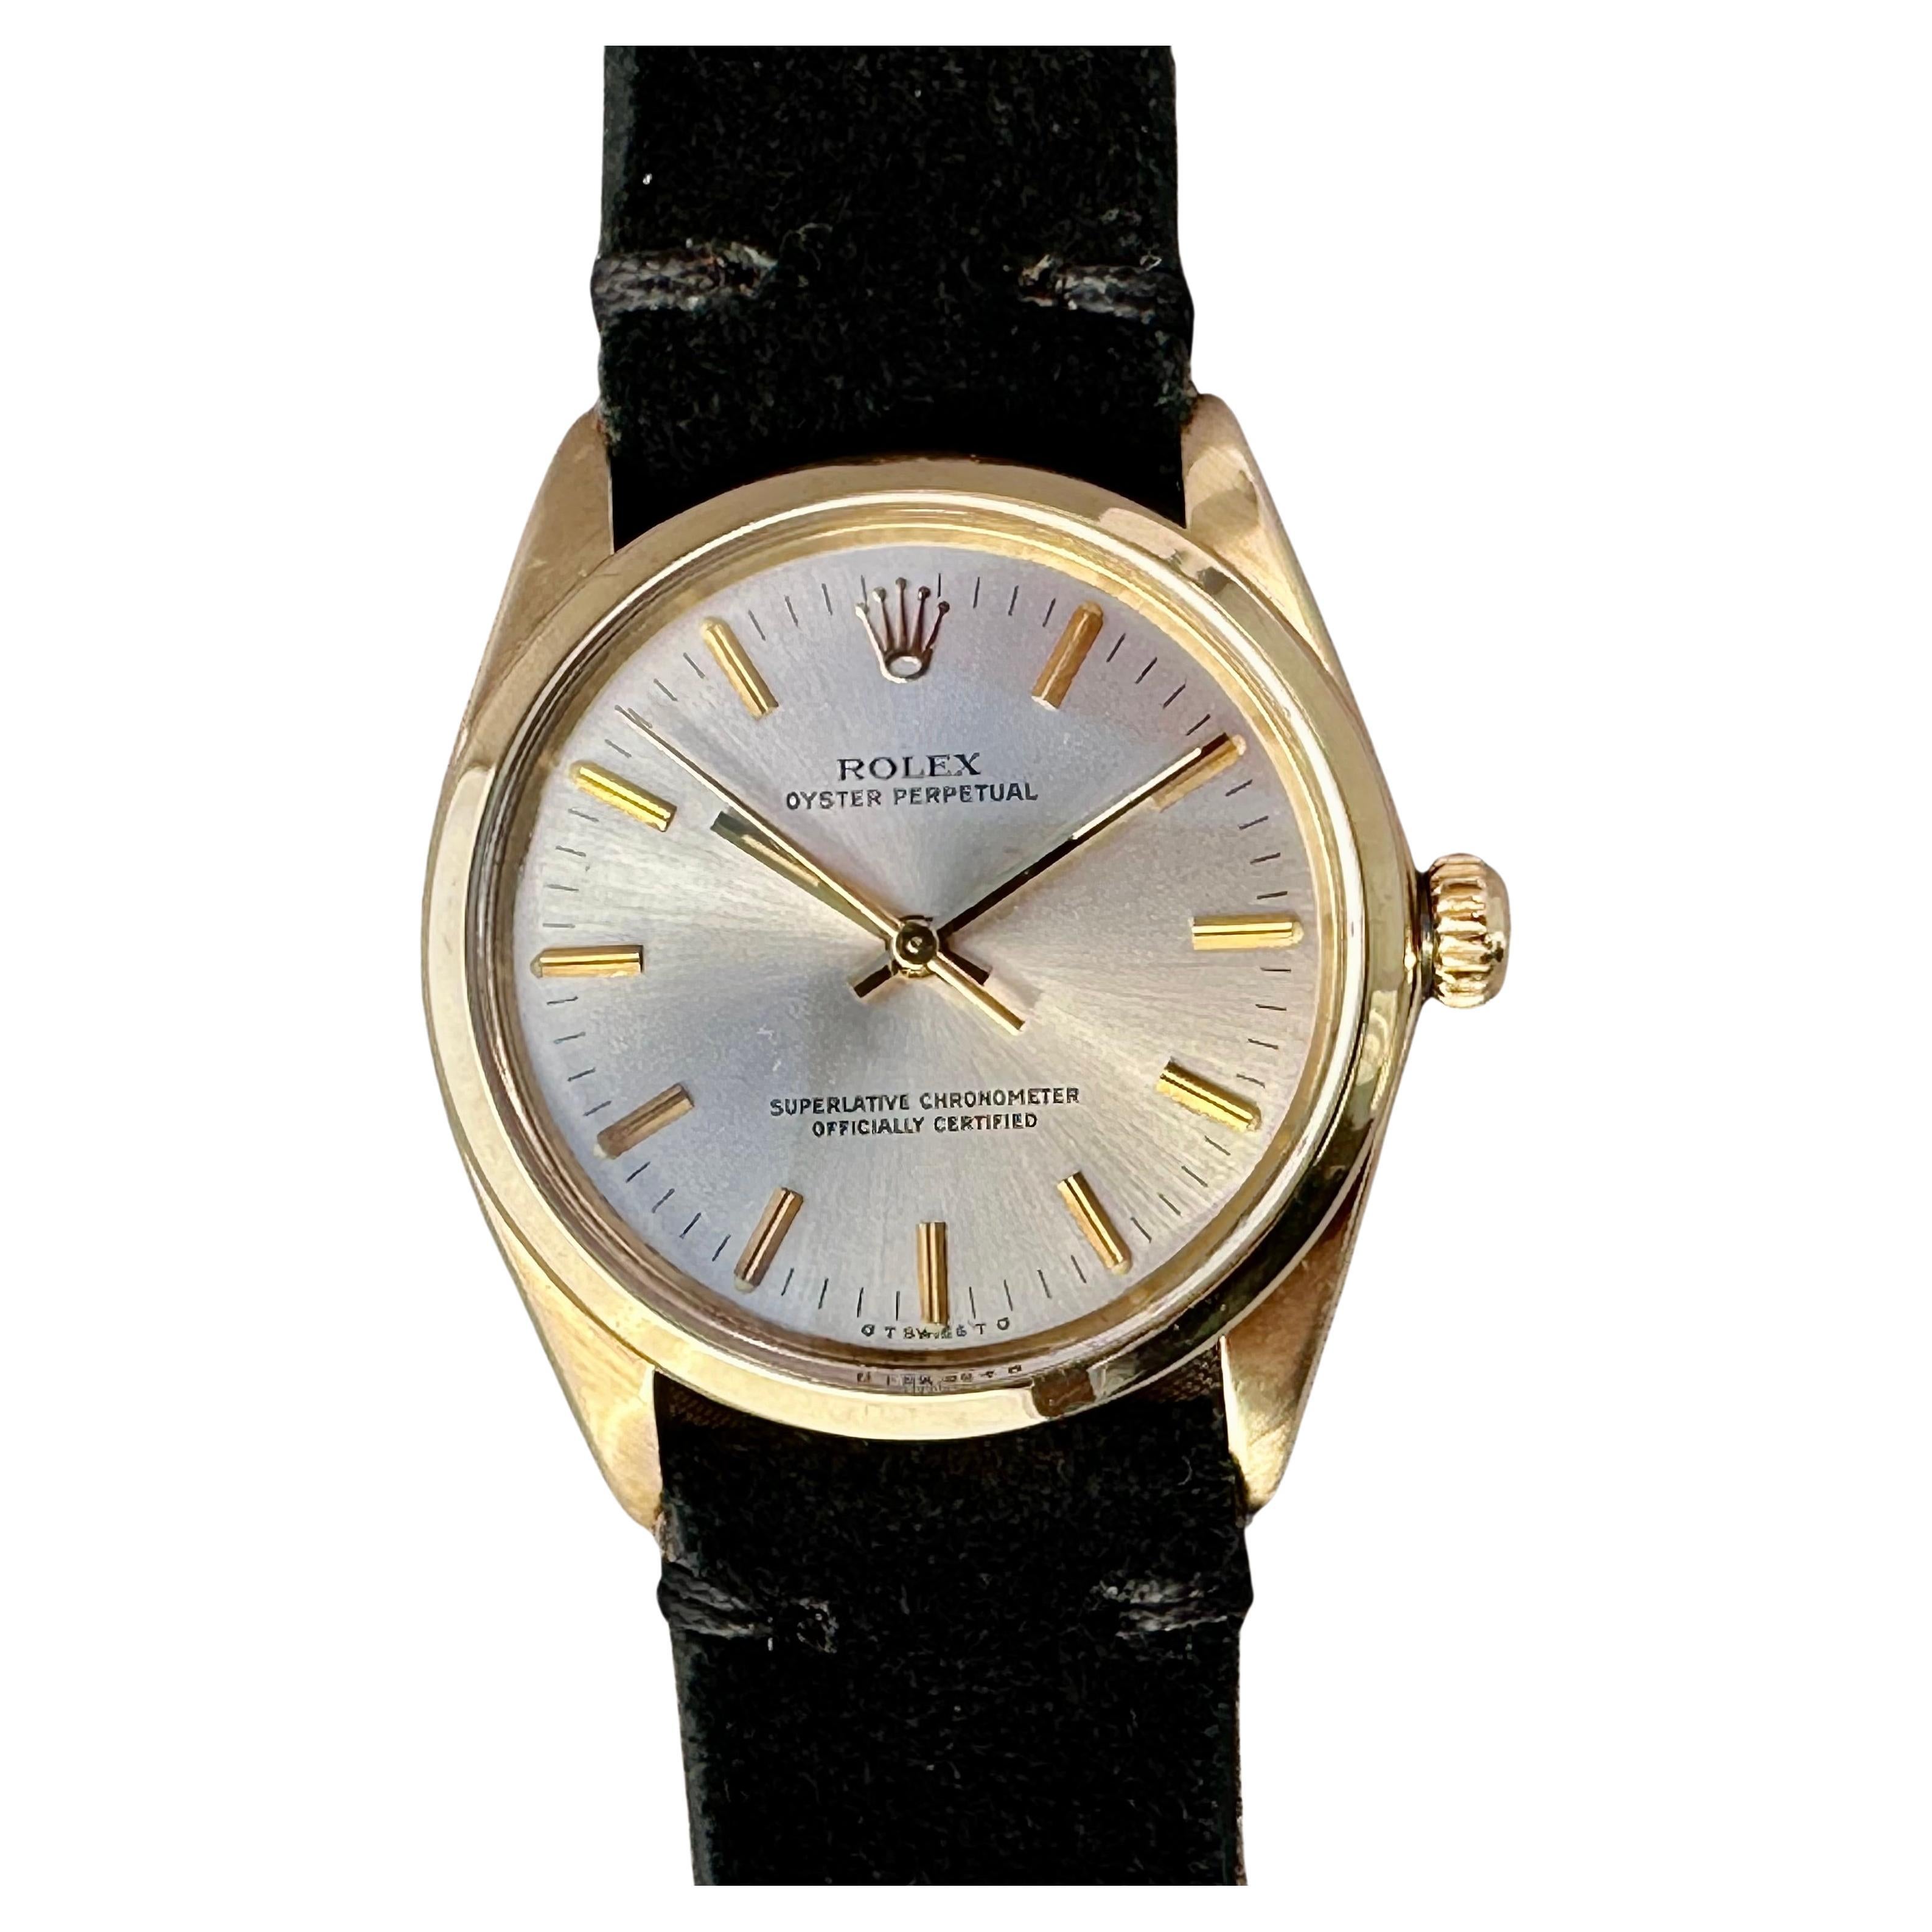 Rolex Oyster Perpetual Chronometer 14K Yellow Gold Ref. # 1002 1974 "Mint Shape" For Sale